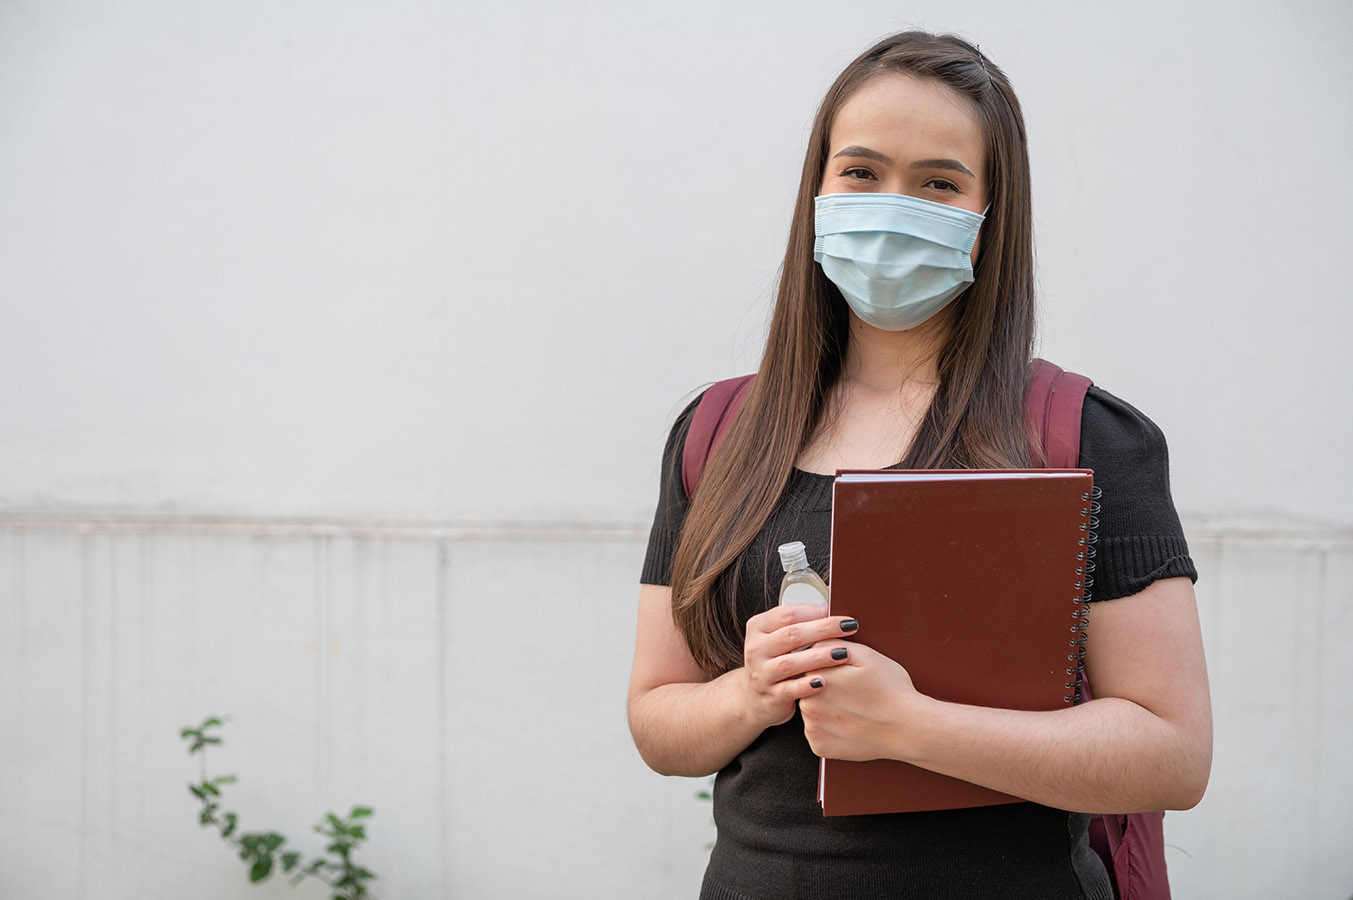 Teen wearing a face mask while standing outside.